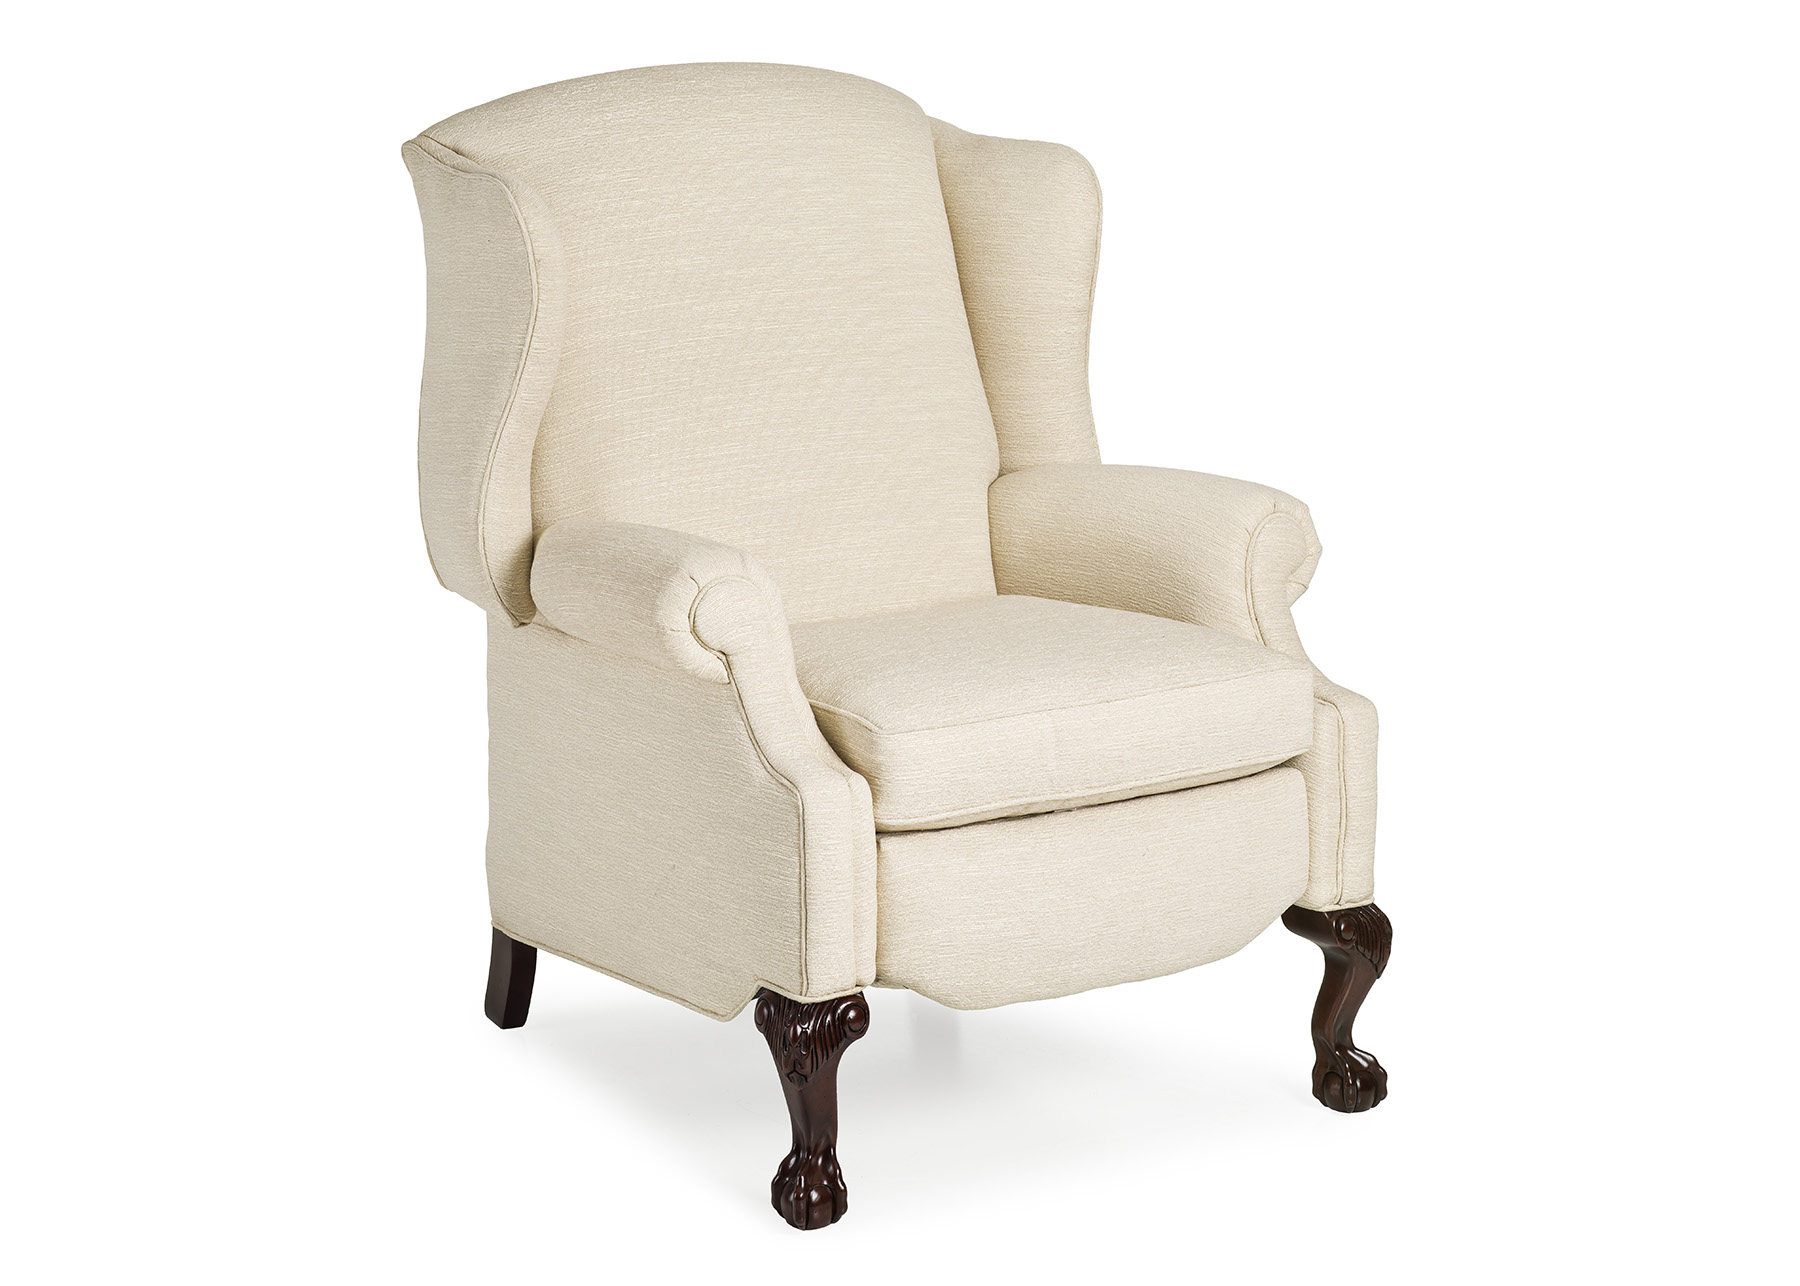 STERLING WING CHAIR POWER RECLINER W/BATTERY